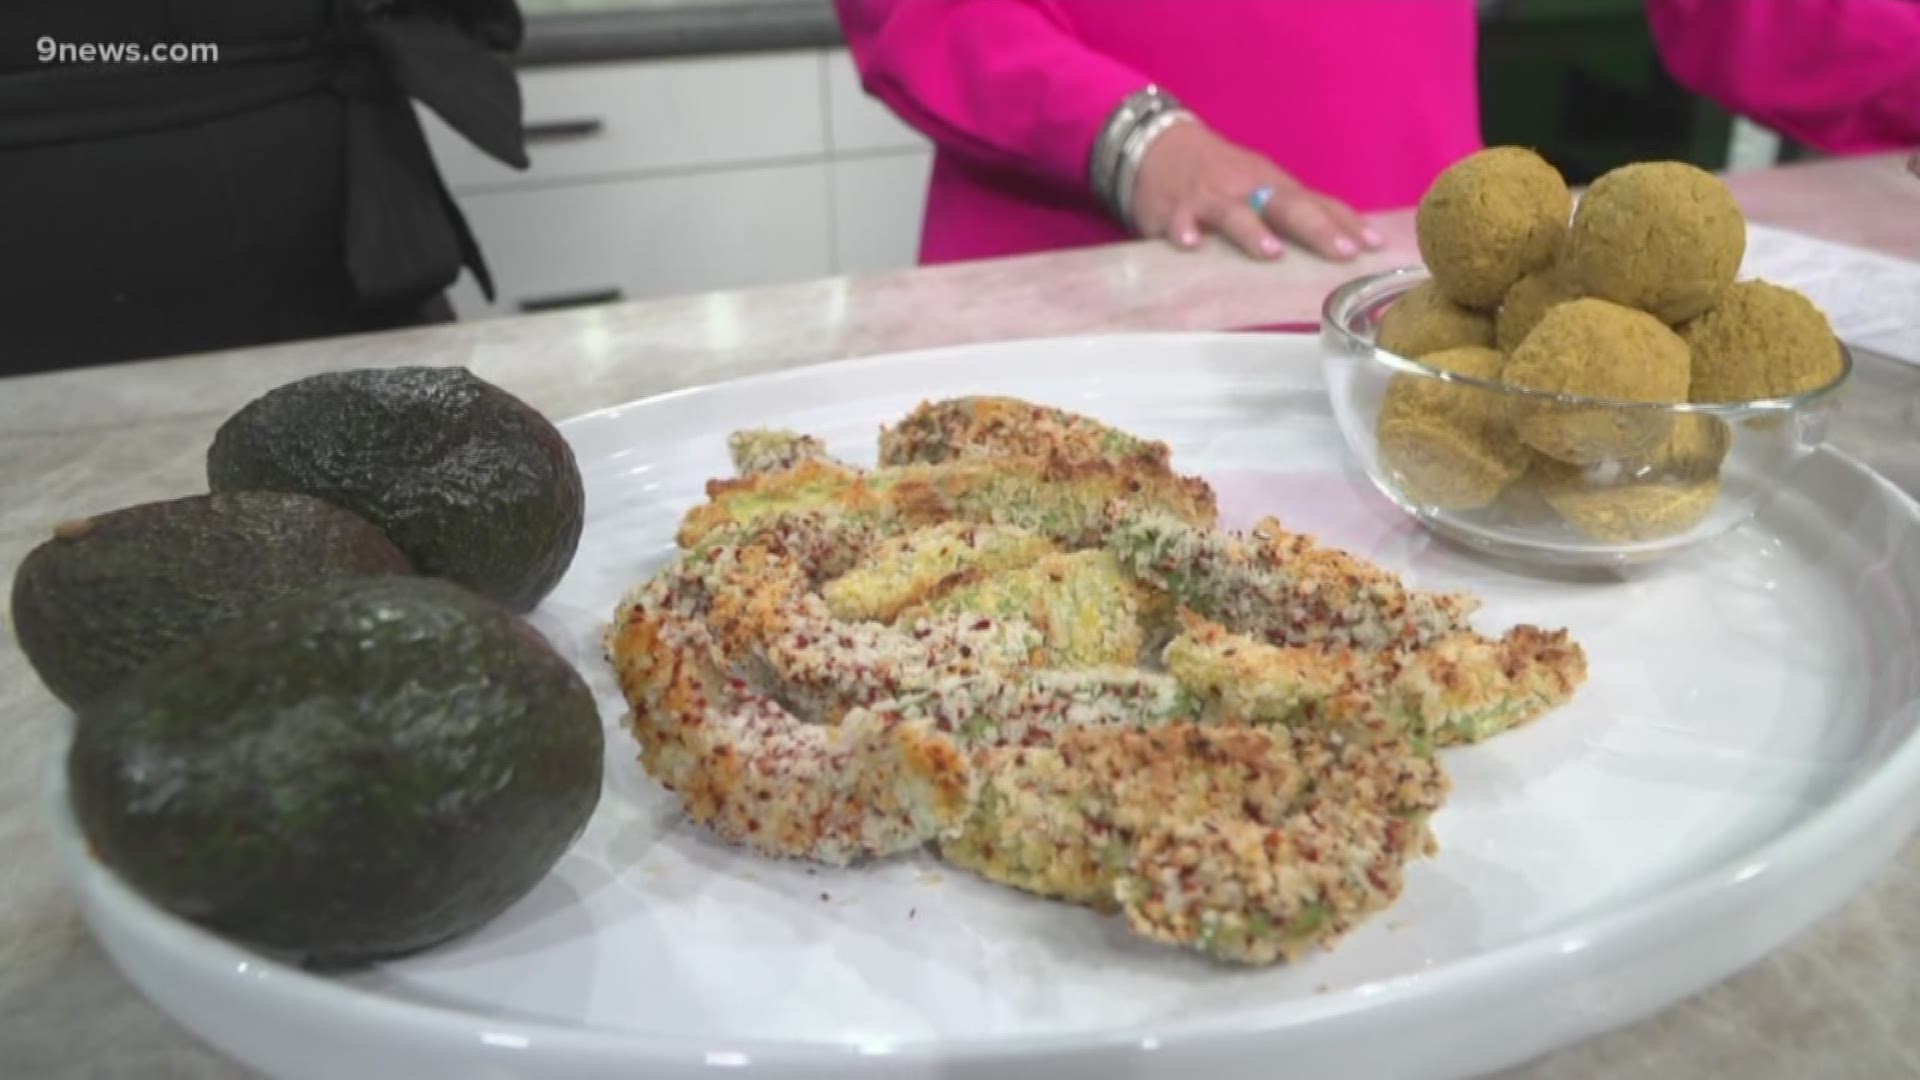 9NEWS Nutritionist Malena Perdomo shares some tasty snacks that aren't just delicious but also good for you.